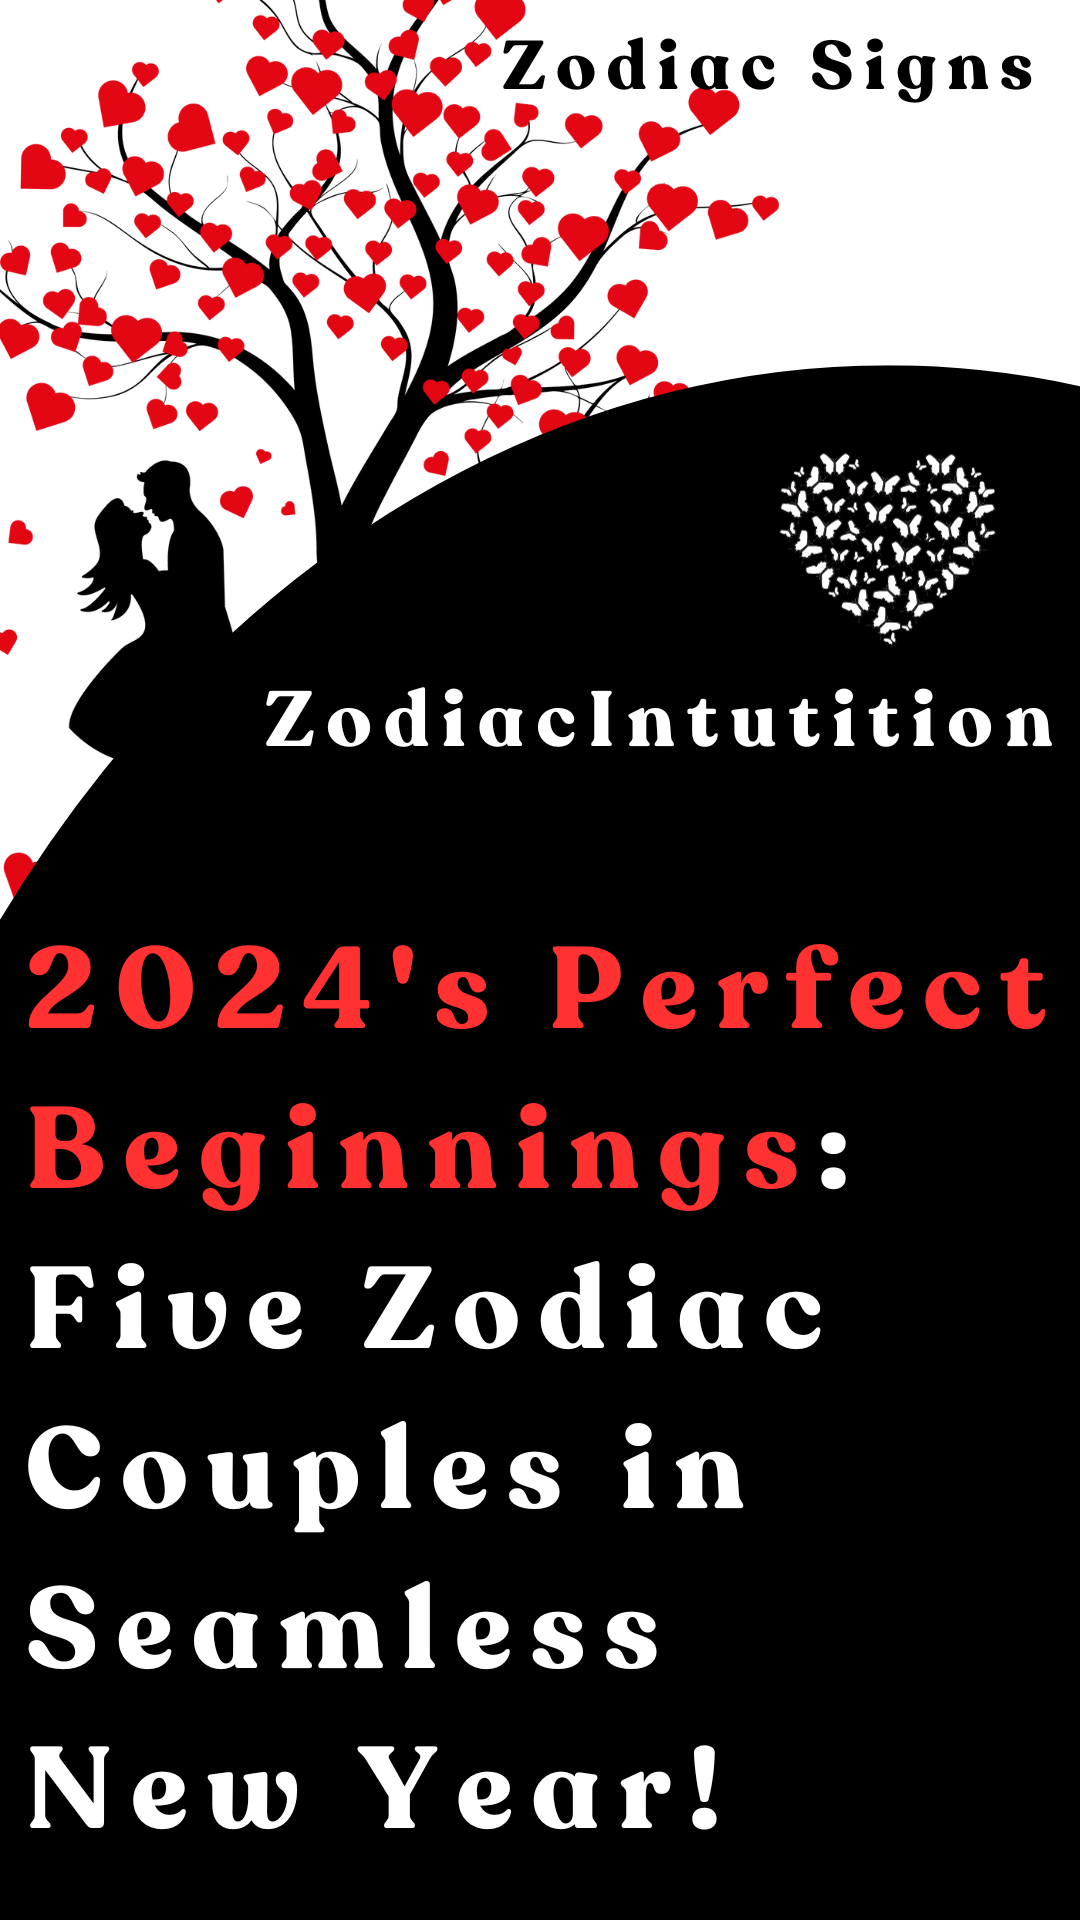 2024's Perfect Beginnings: Five Zodiac Couples in Seamless New Year!